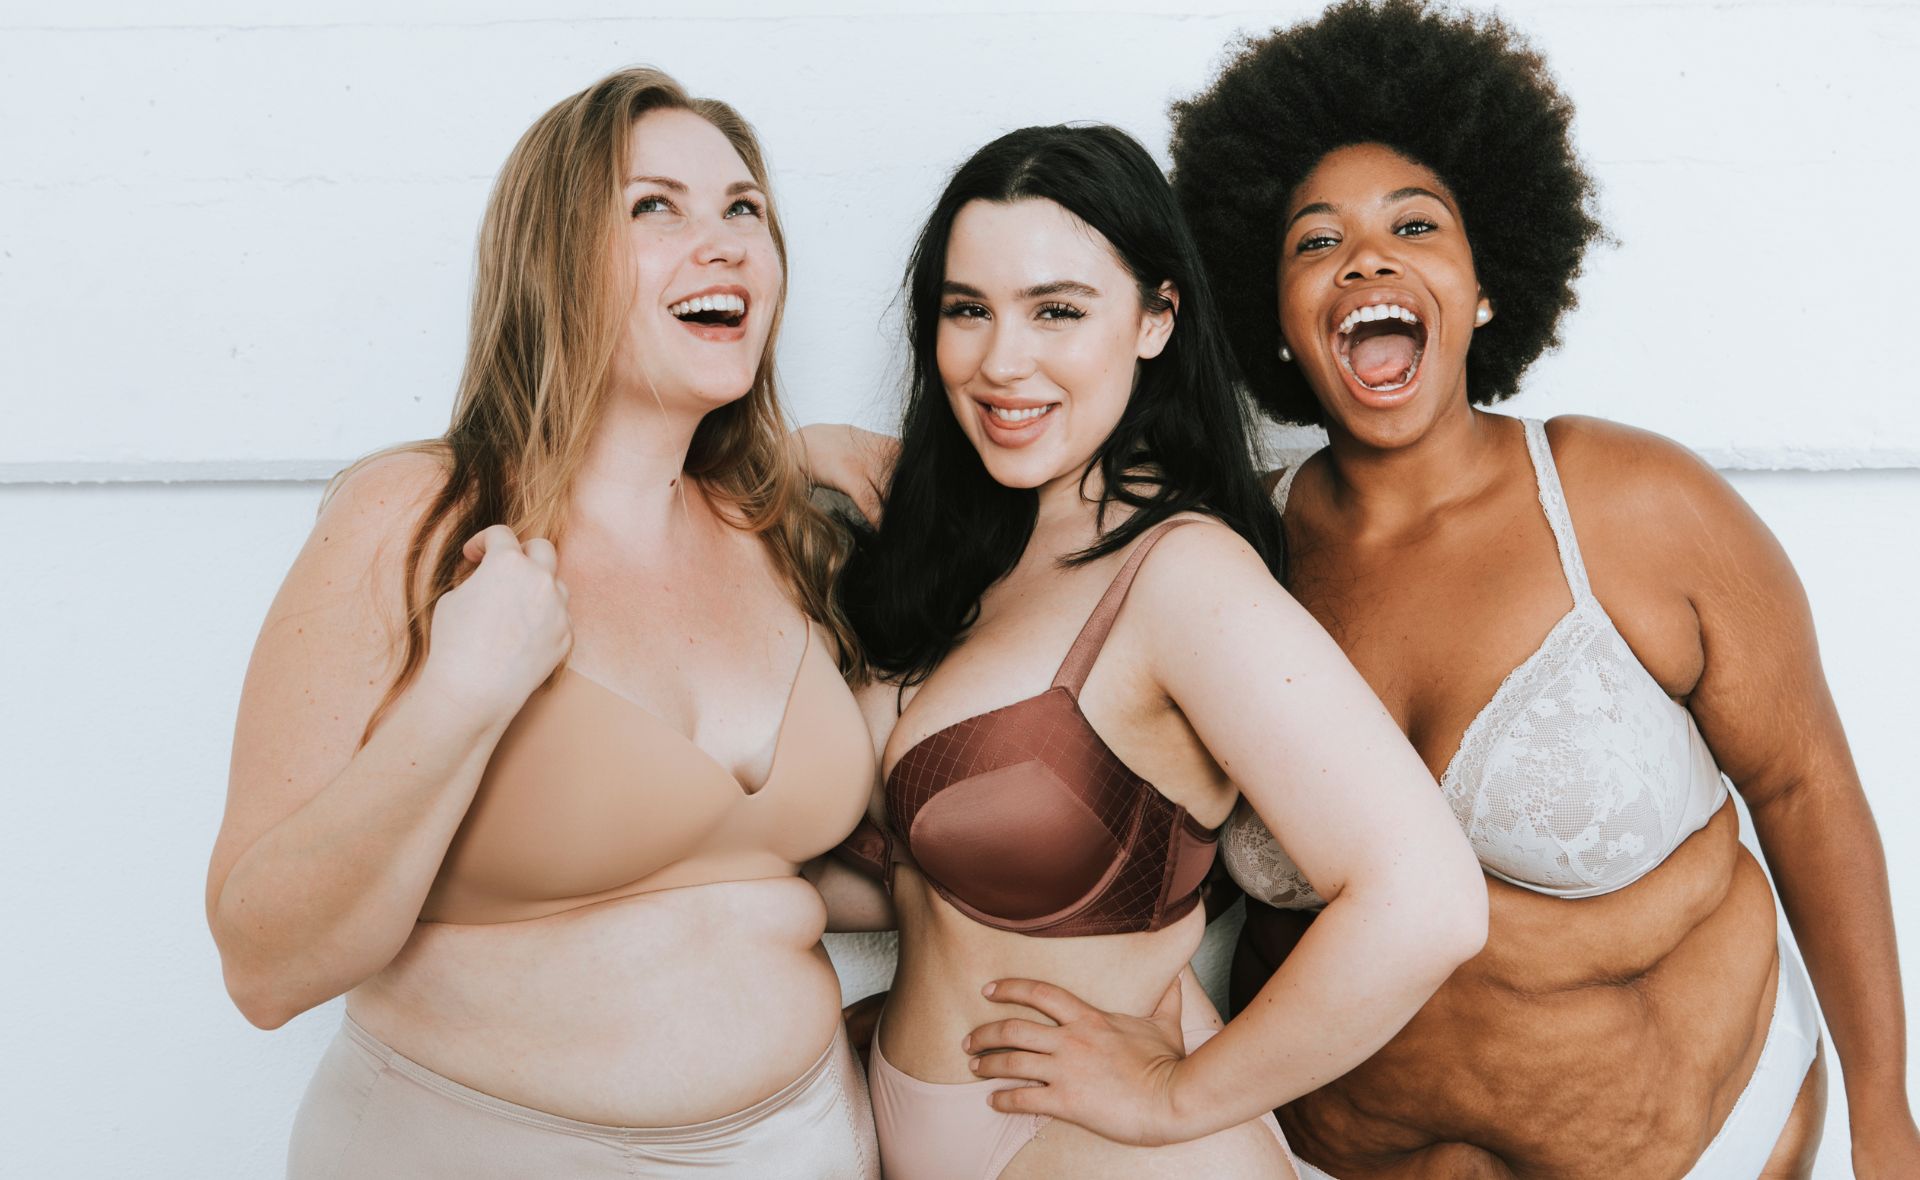 Flatter your curves and say goodbye to discomfort with the best plus size bras Australia has to offer